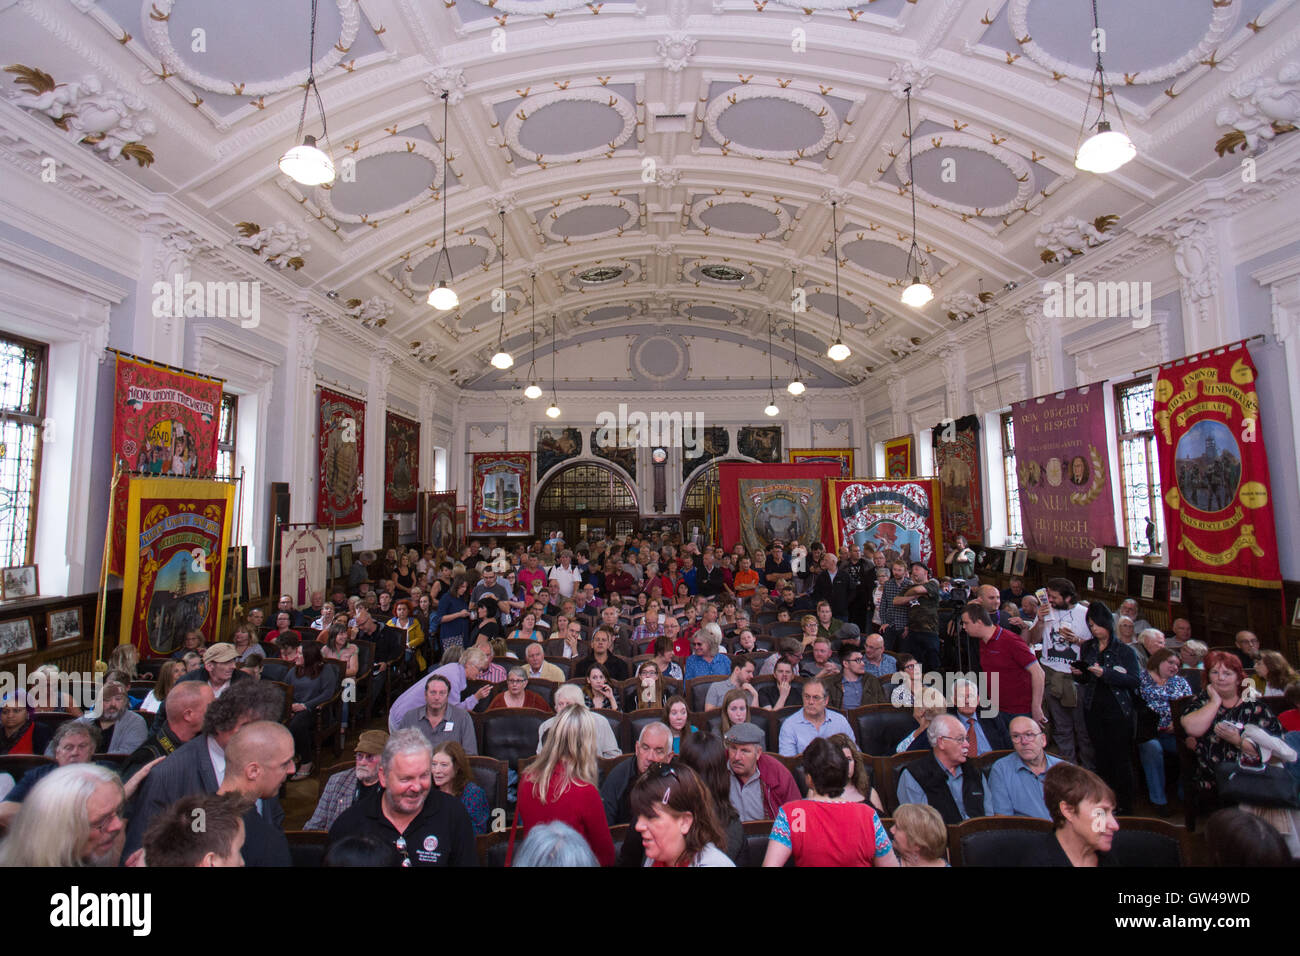 General View of the Miners Hall, during a political rally, at the National Union of Mineworkers, in Barnsley, South Yorkshire. Stock Photo